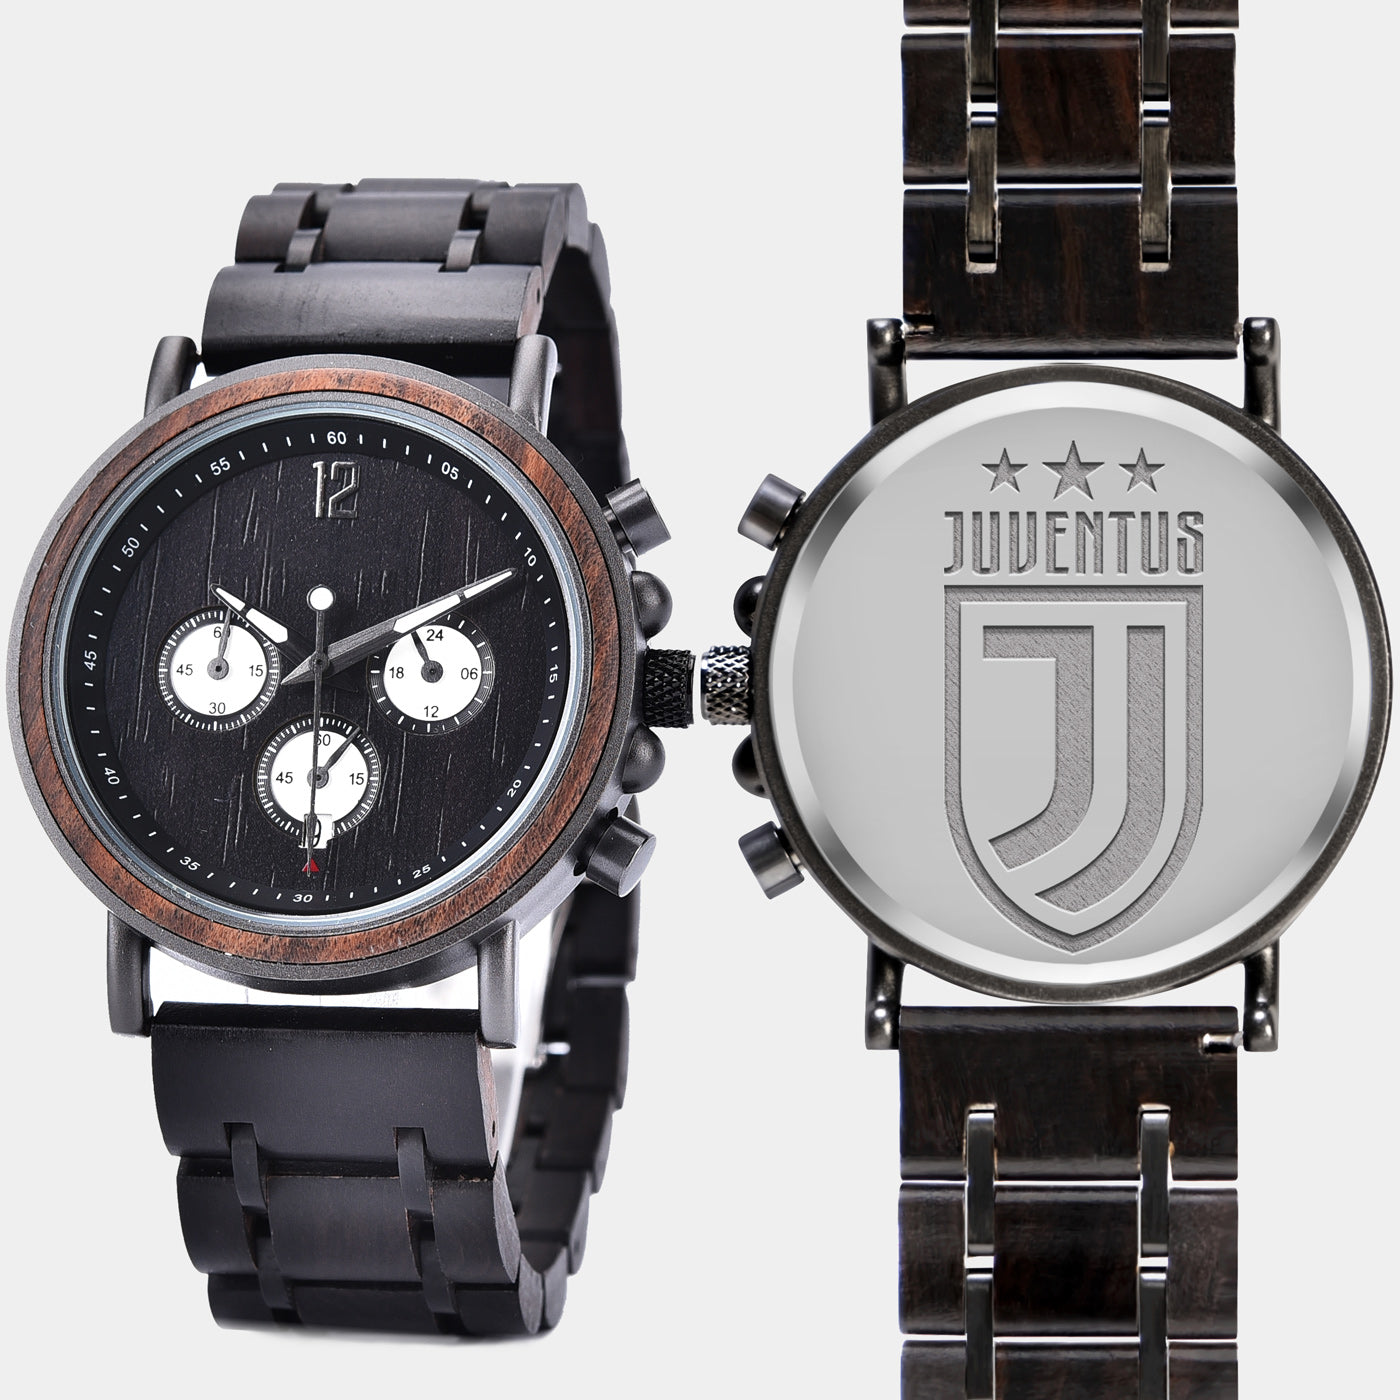 Juventus Club Mens Wrist Watch  - Personalized Juventus Club Mens Watches - Custom Gifts For Him, Birthday Gifts, Gift For Dad - Best 2022 Juventus Club Christmas Gifts - Black 45mm FC Wood Watch